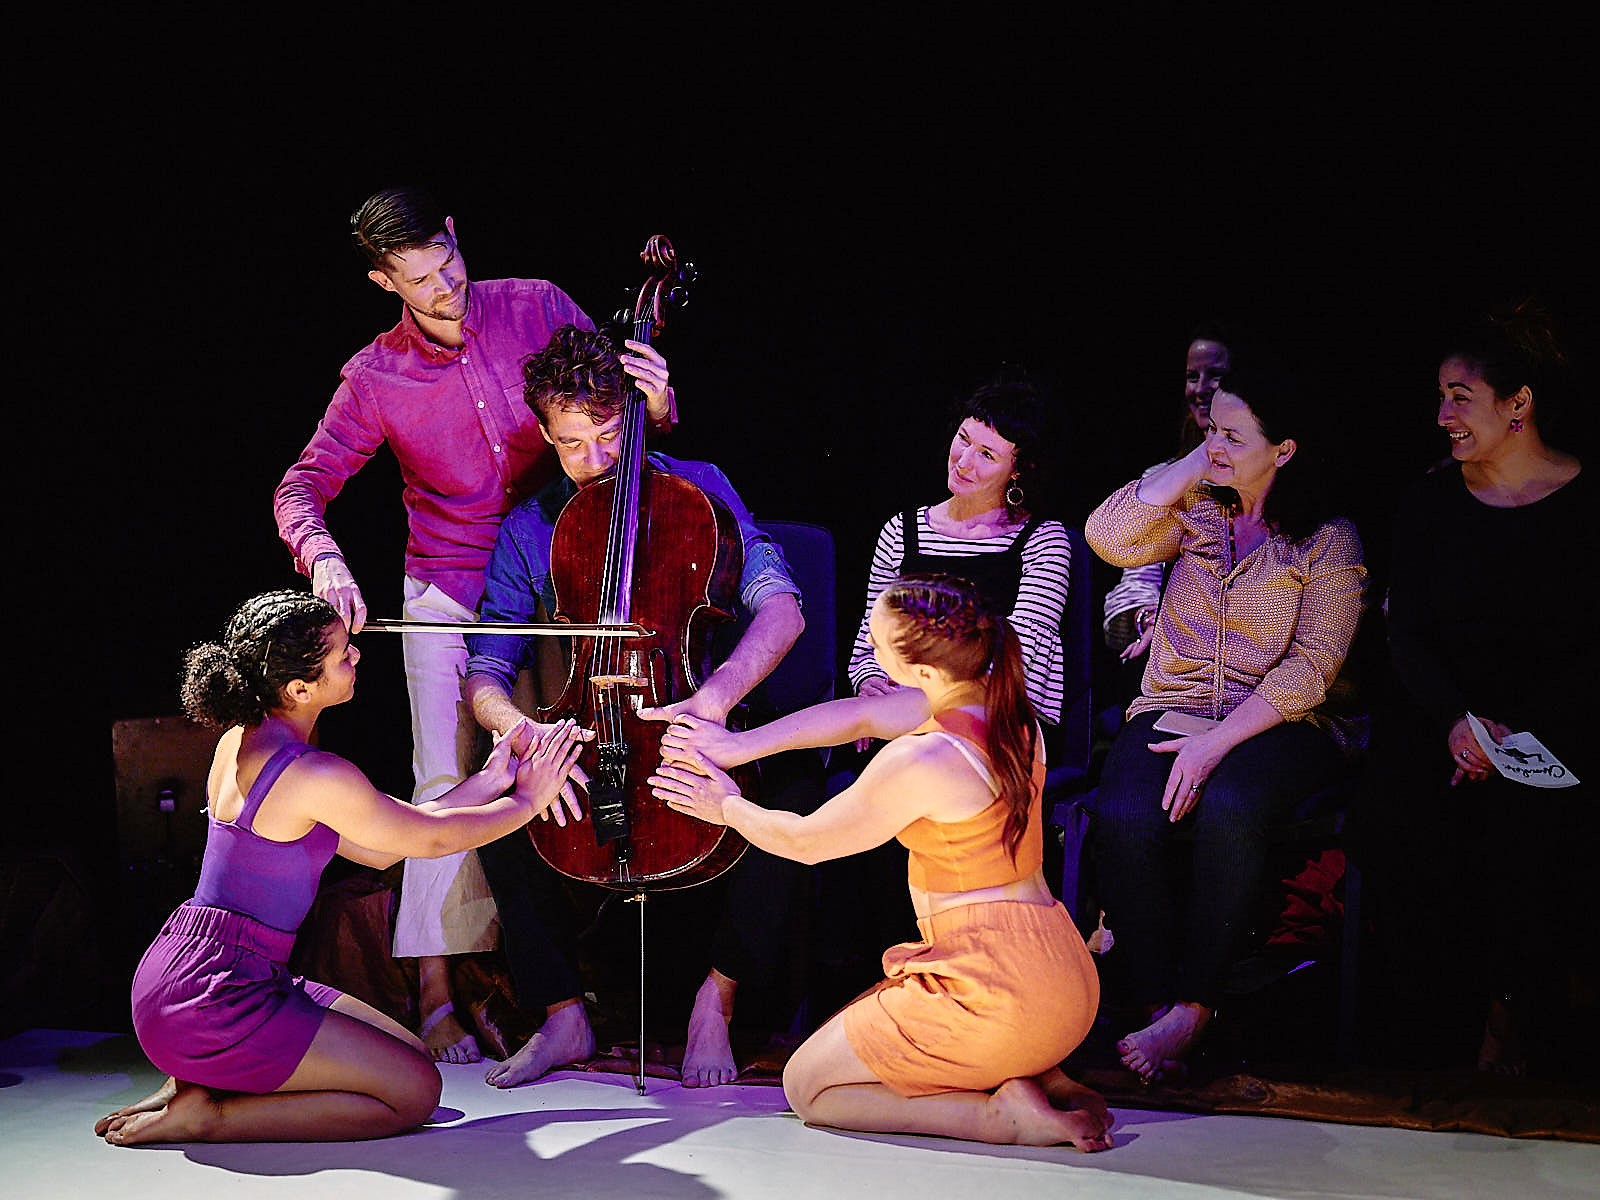 Cello Embrace from 'Chocolate'. Java Dance Company, 201